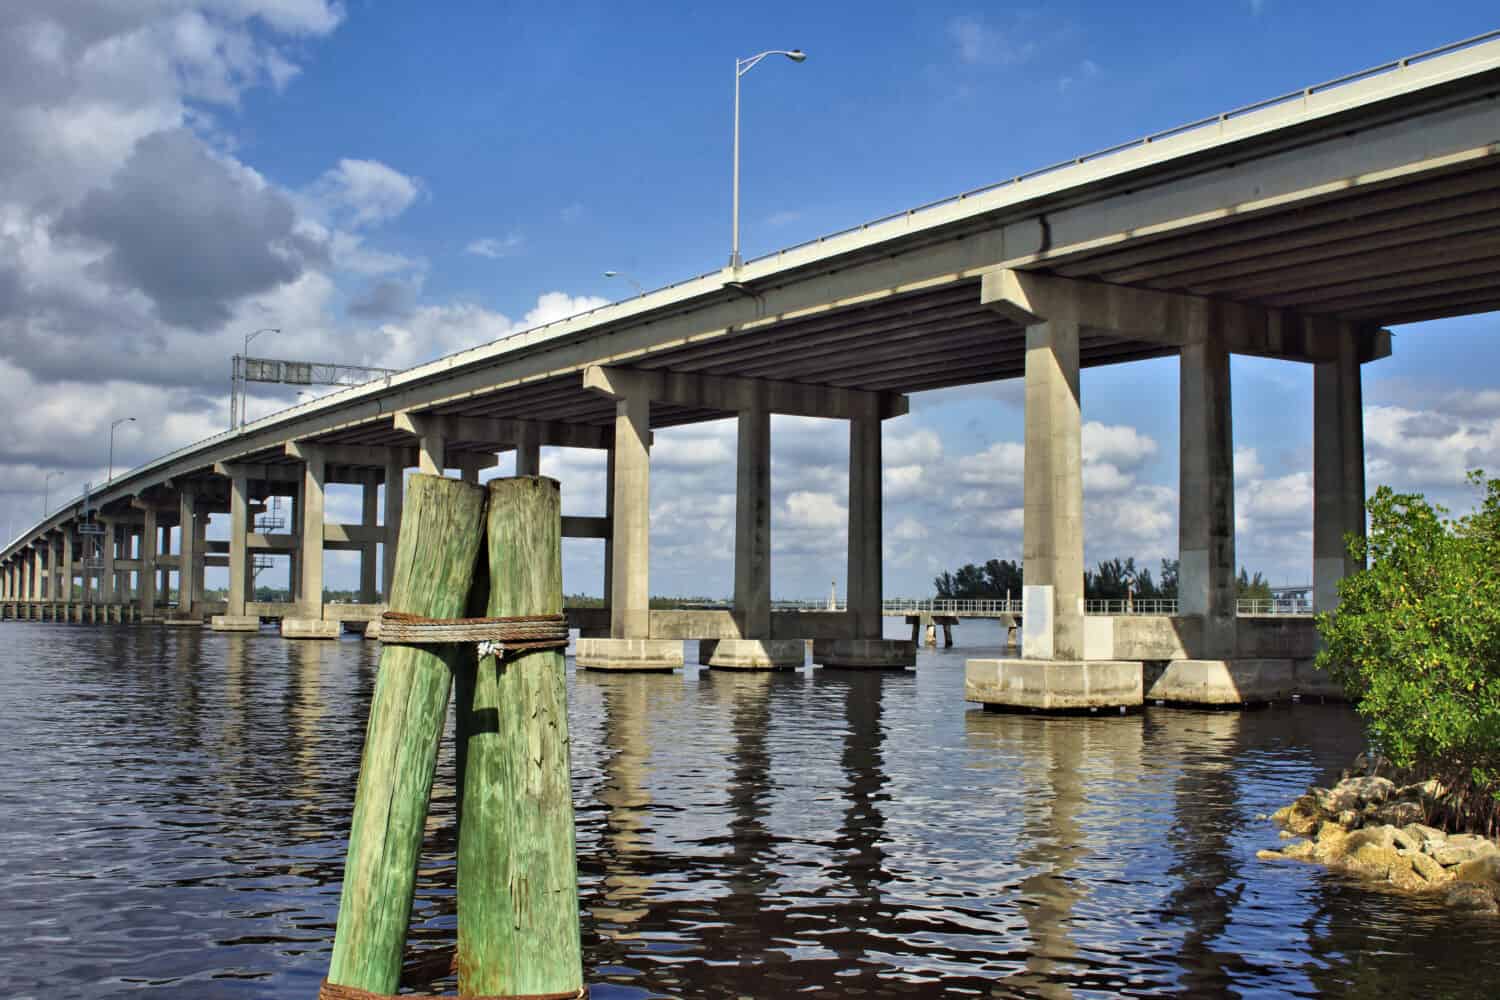 US Highway 41 bridge spanning the Caloosahatchee River from Centennial Park in Fort Myers, Florida                            